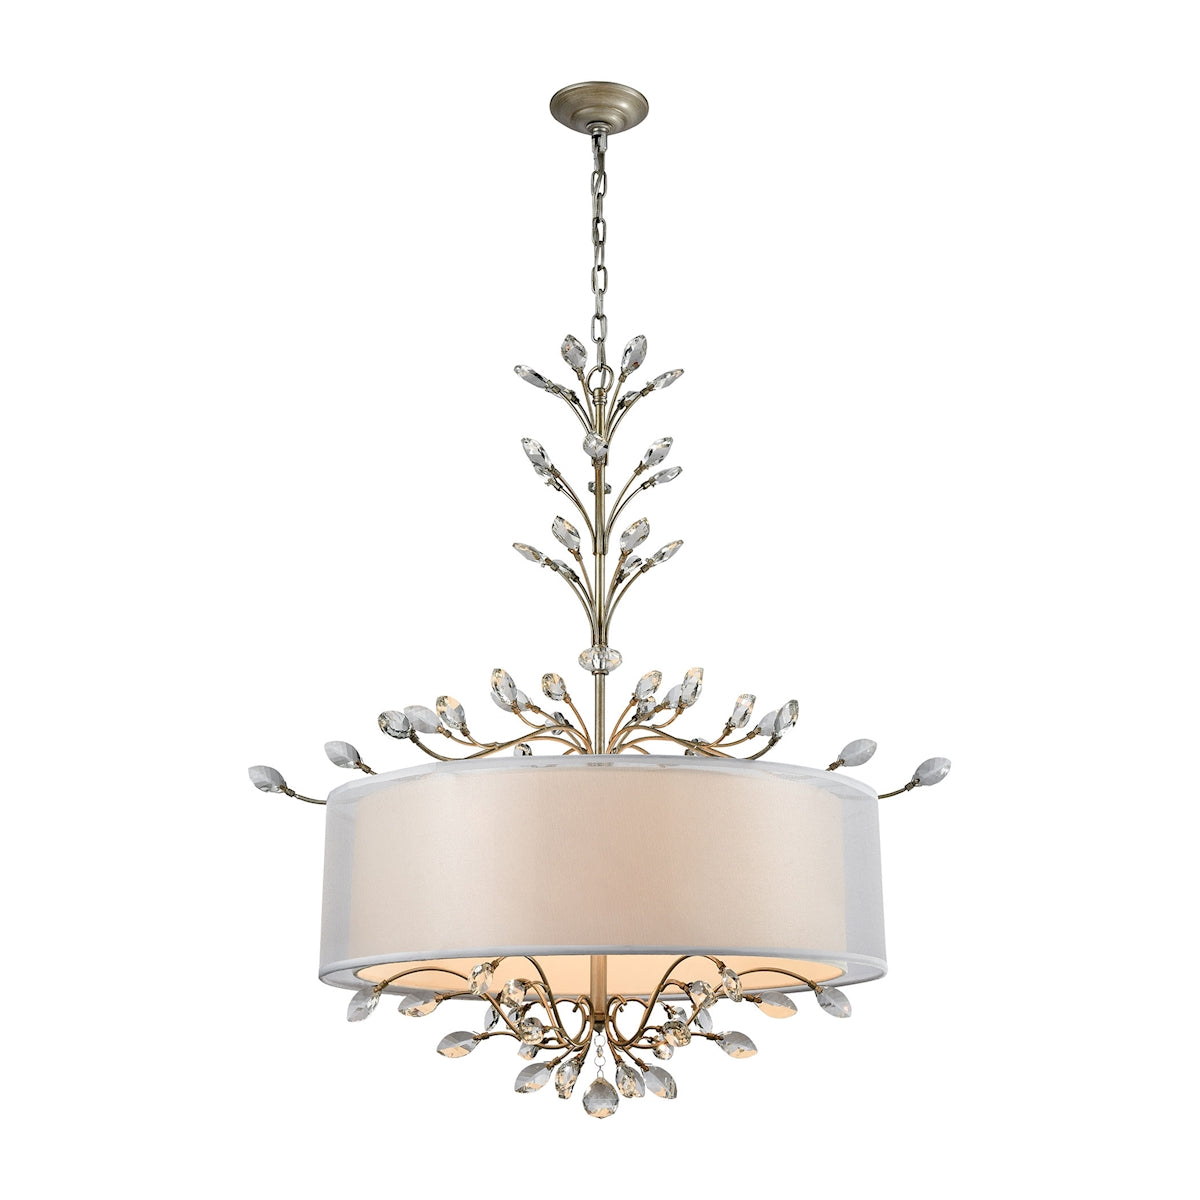 ELK Lighting 16283/6 Asbury 6-Light Chandelier in Aged Silver with Organza and White Fabric Shade